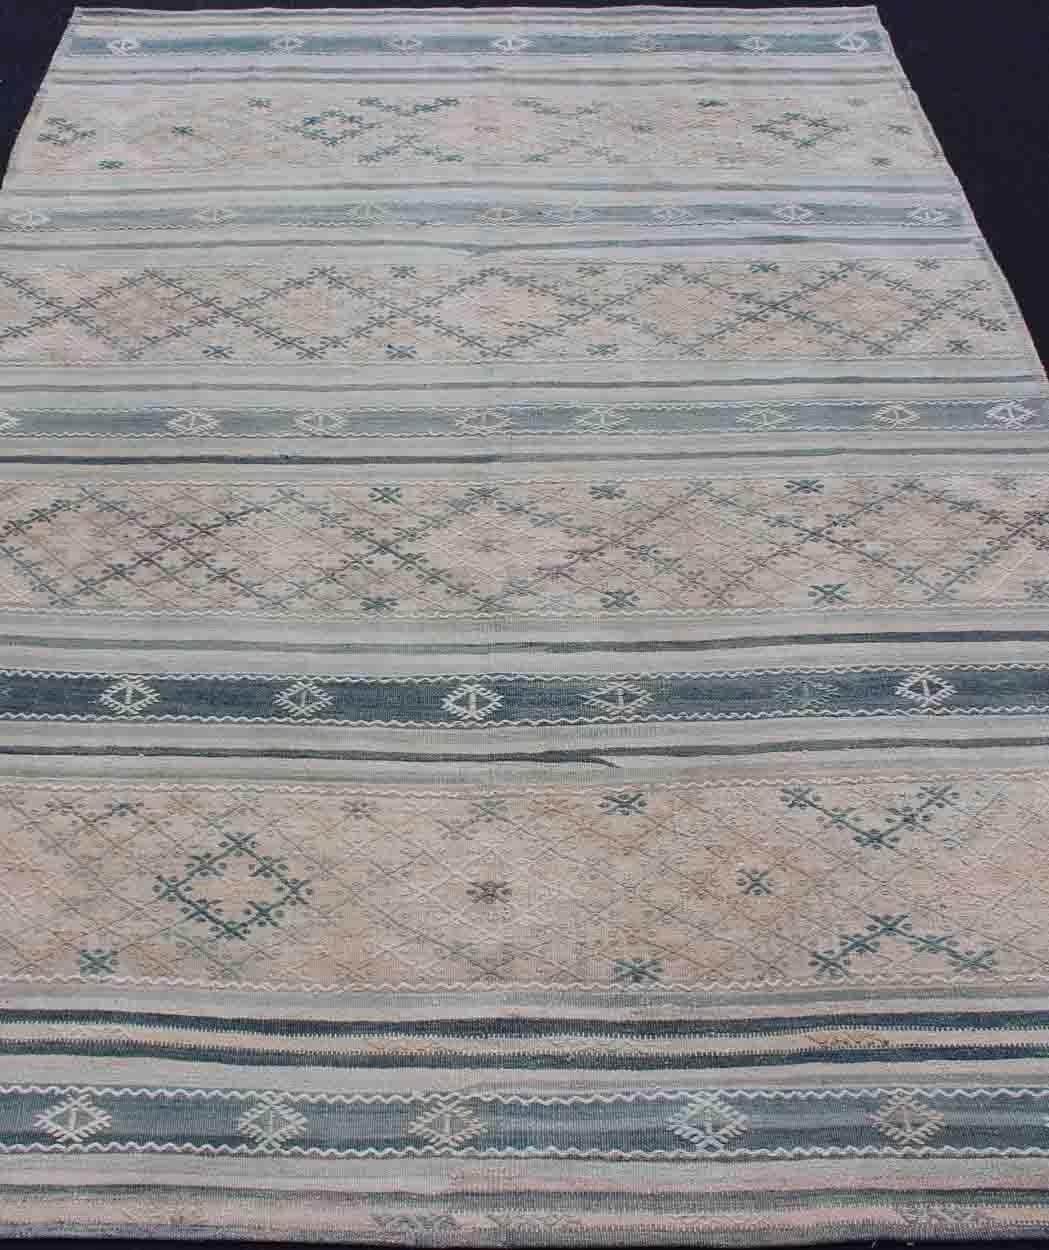 Vintage Turkish Flat-Weave Kilim with Embroideries in Diamonds and Stripes 1